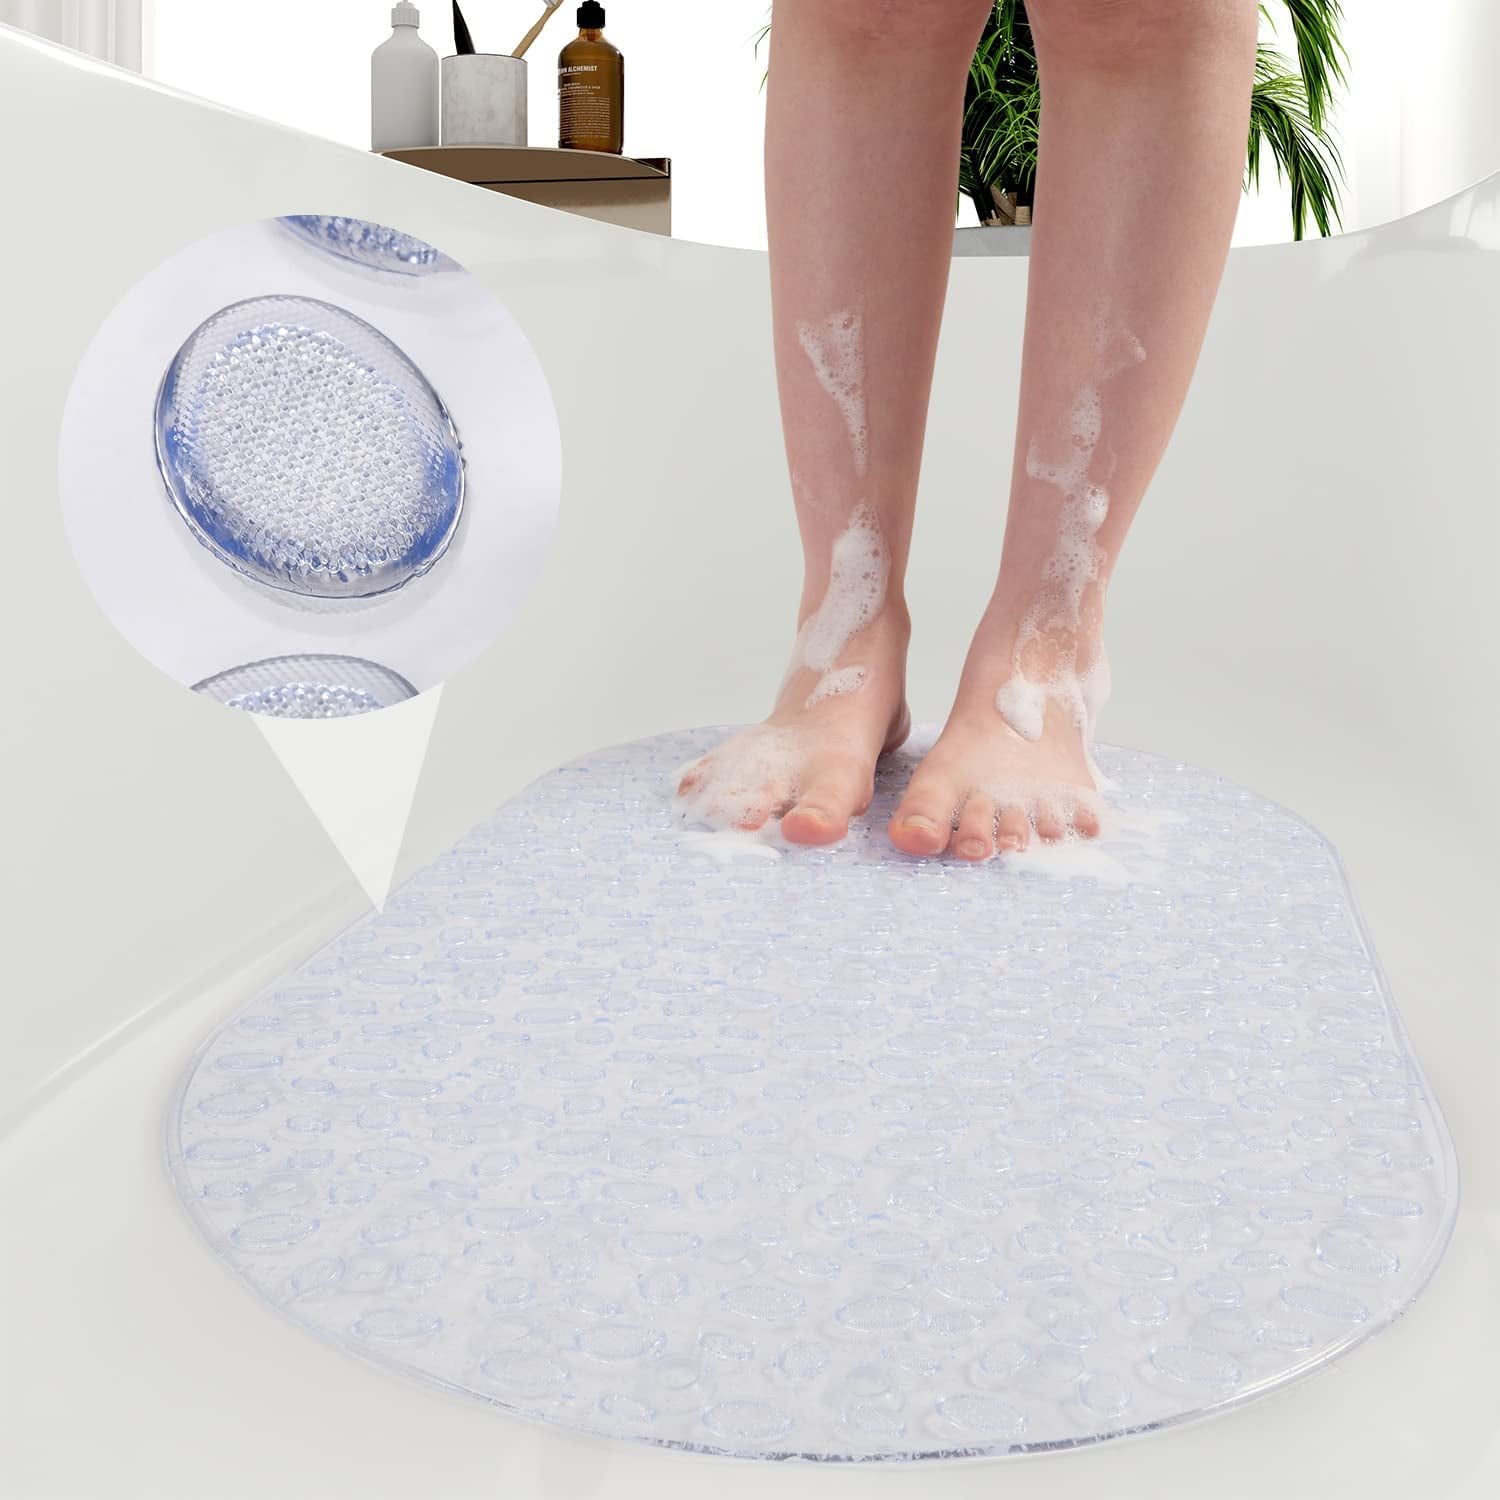 Aoibox 39.4 in. x 15.8 in. Non-Slip Shower Mat in Transparent Blue BPA-Free  Massage Anti-Bacterial with Suction Cups Washable DJHX034B - The Home Depot